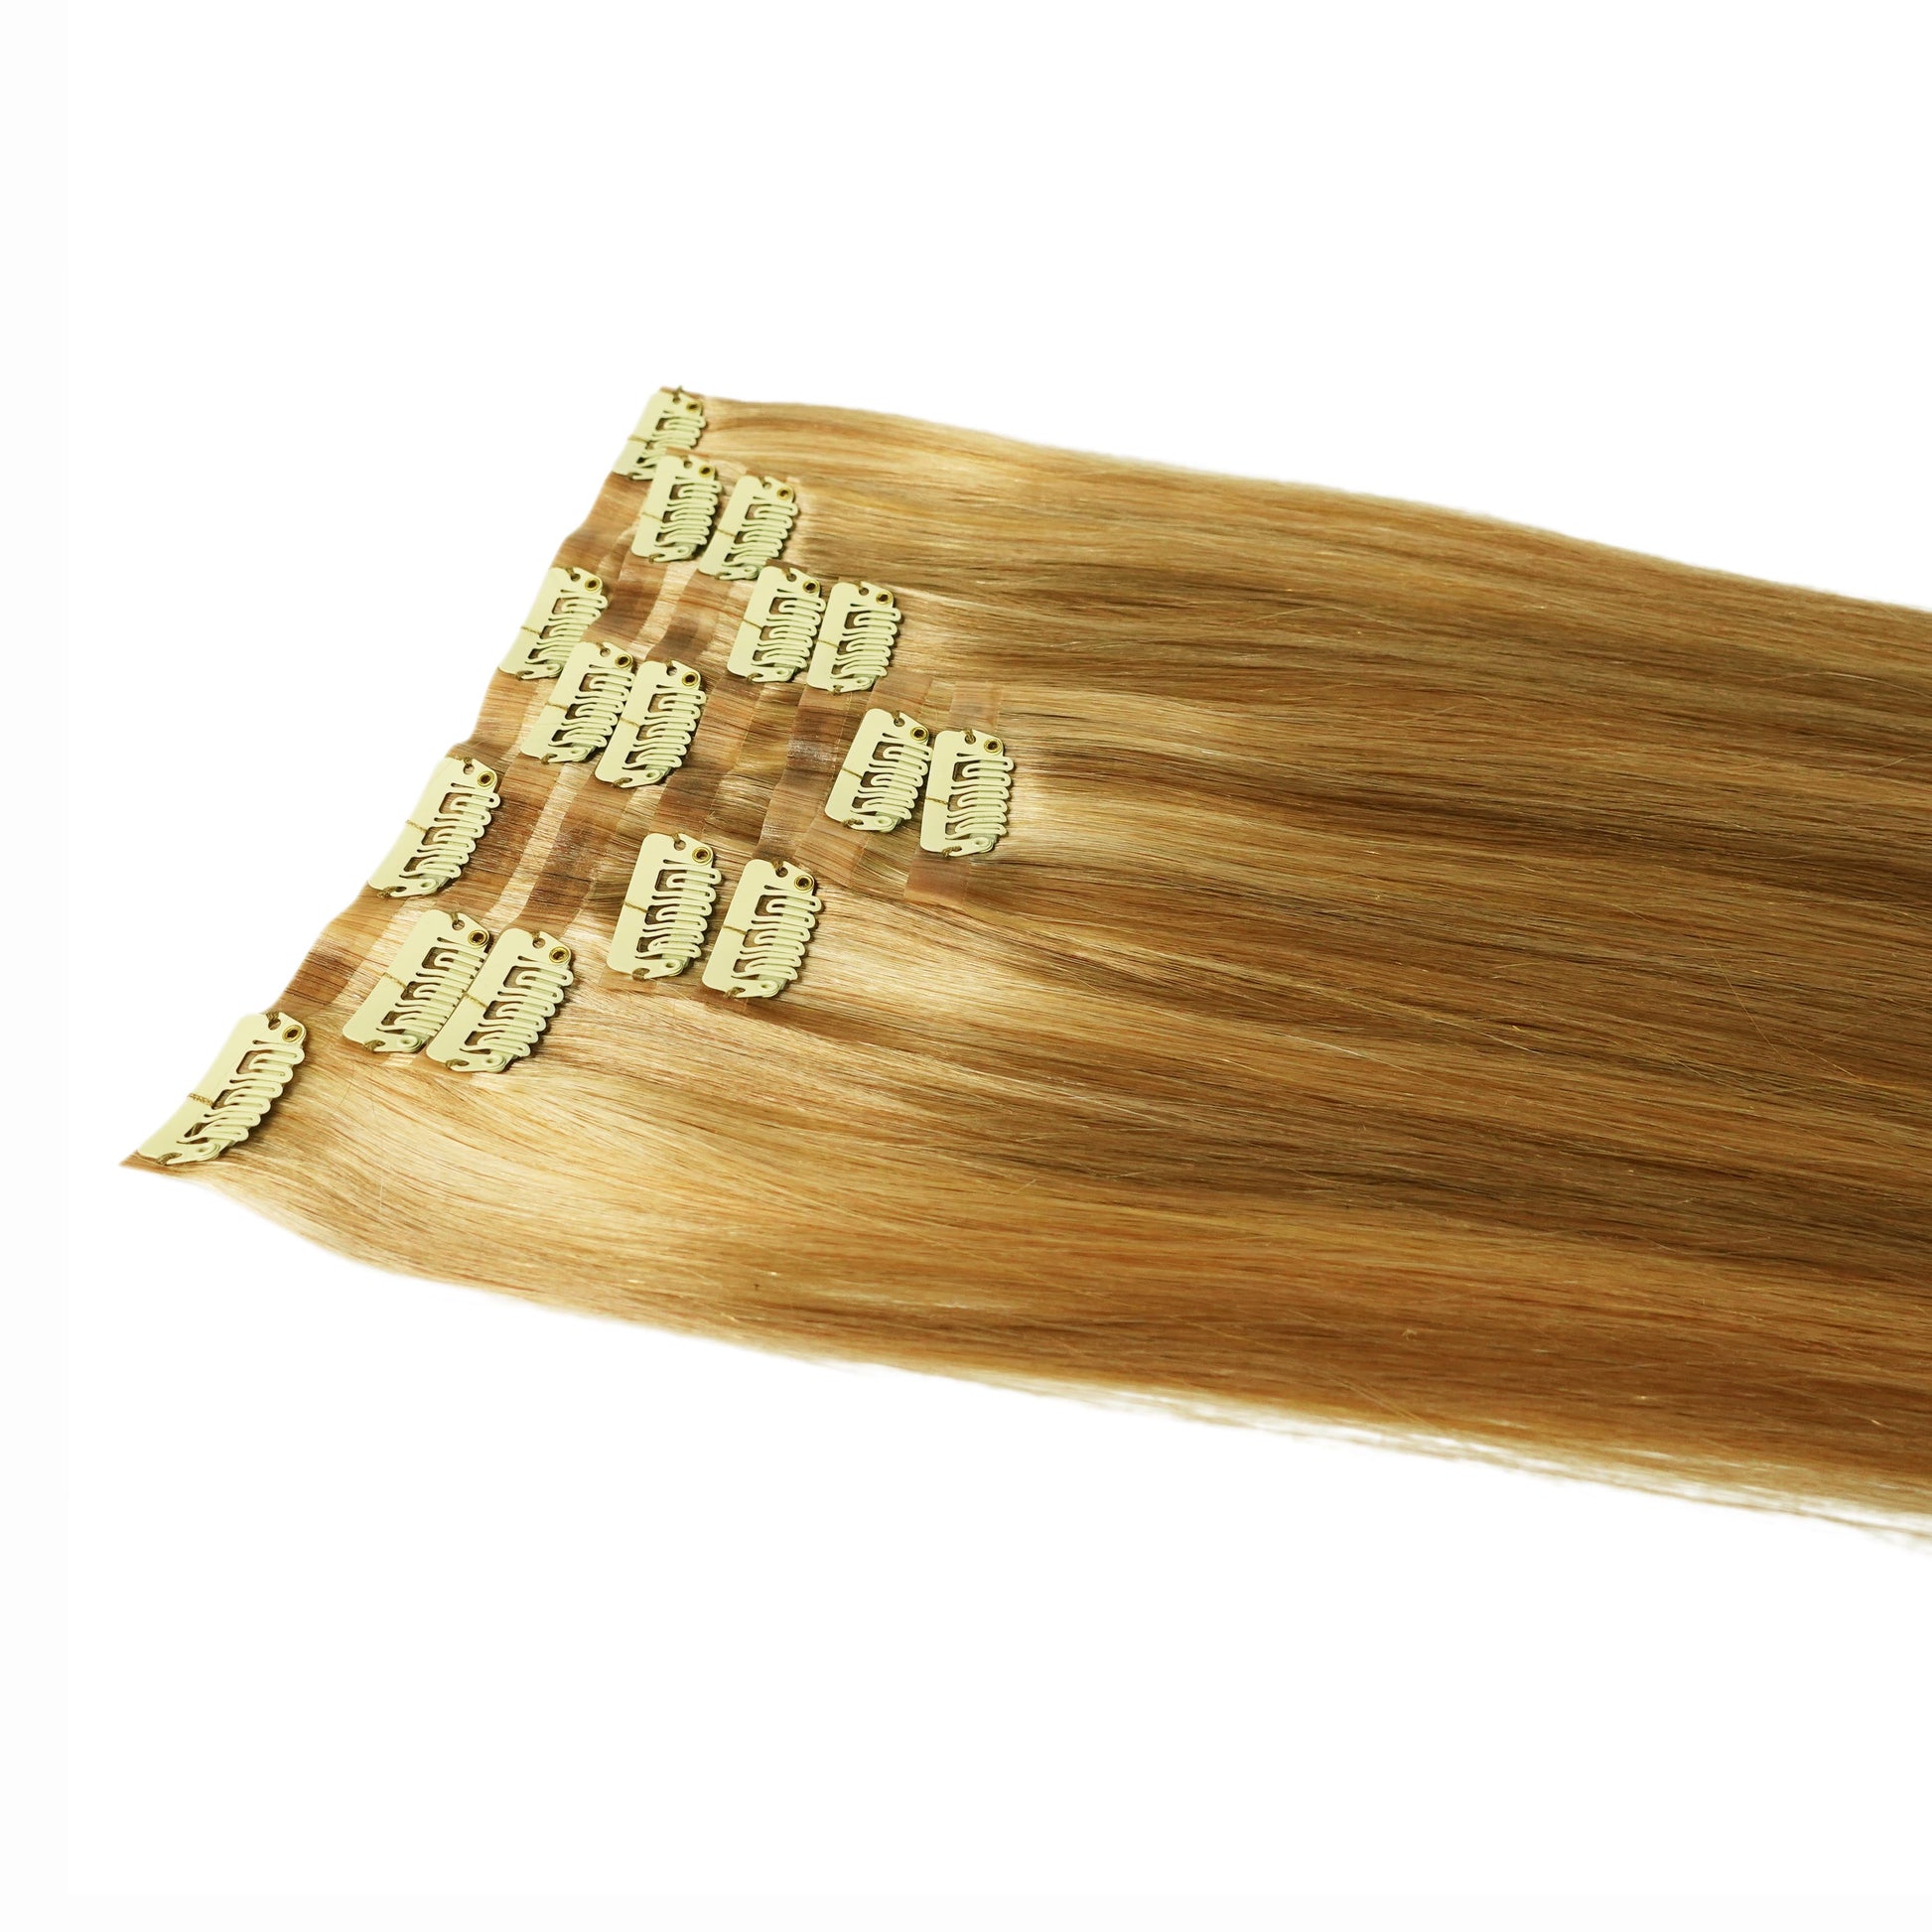 Chloe Collection - Clip-ins 22" #8/22 - 100g.